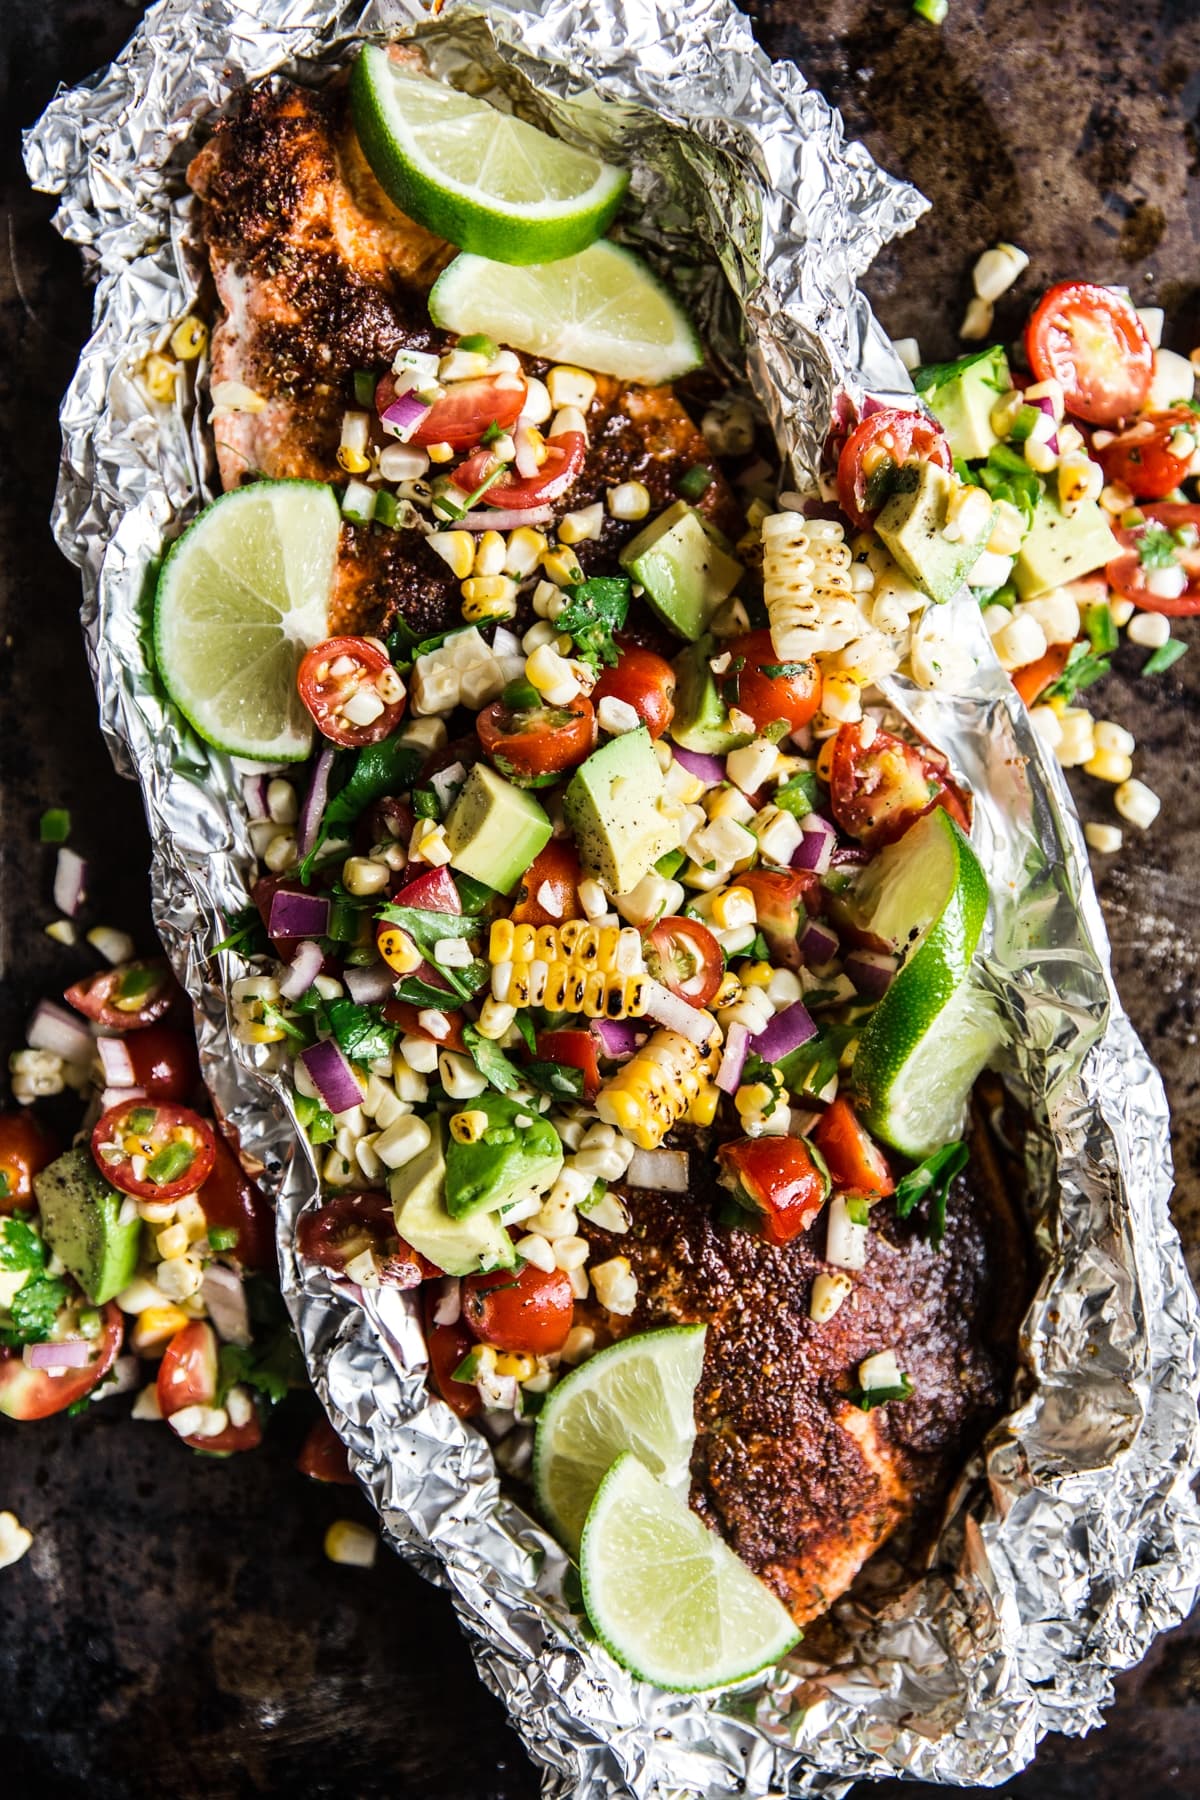 Smoky Grilled Salmon With Avocado Salad The Modern Proper,Modern High Chair Baby